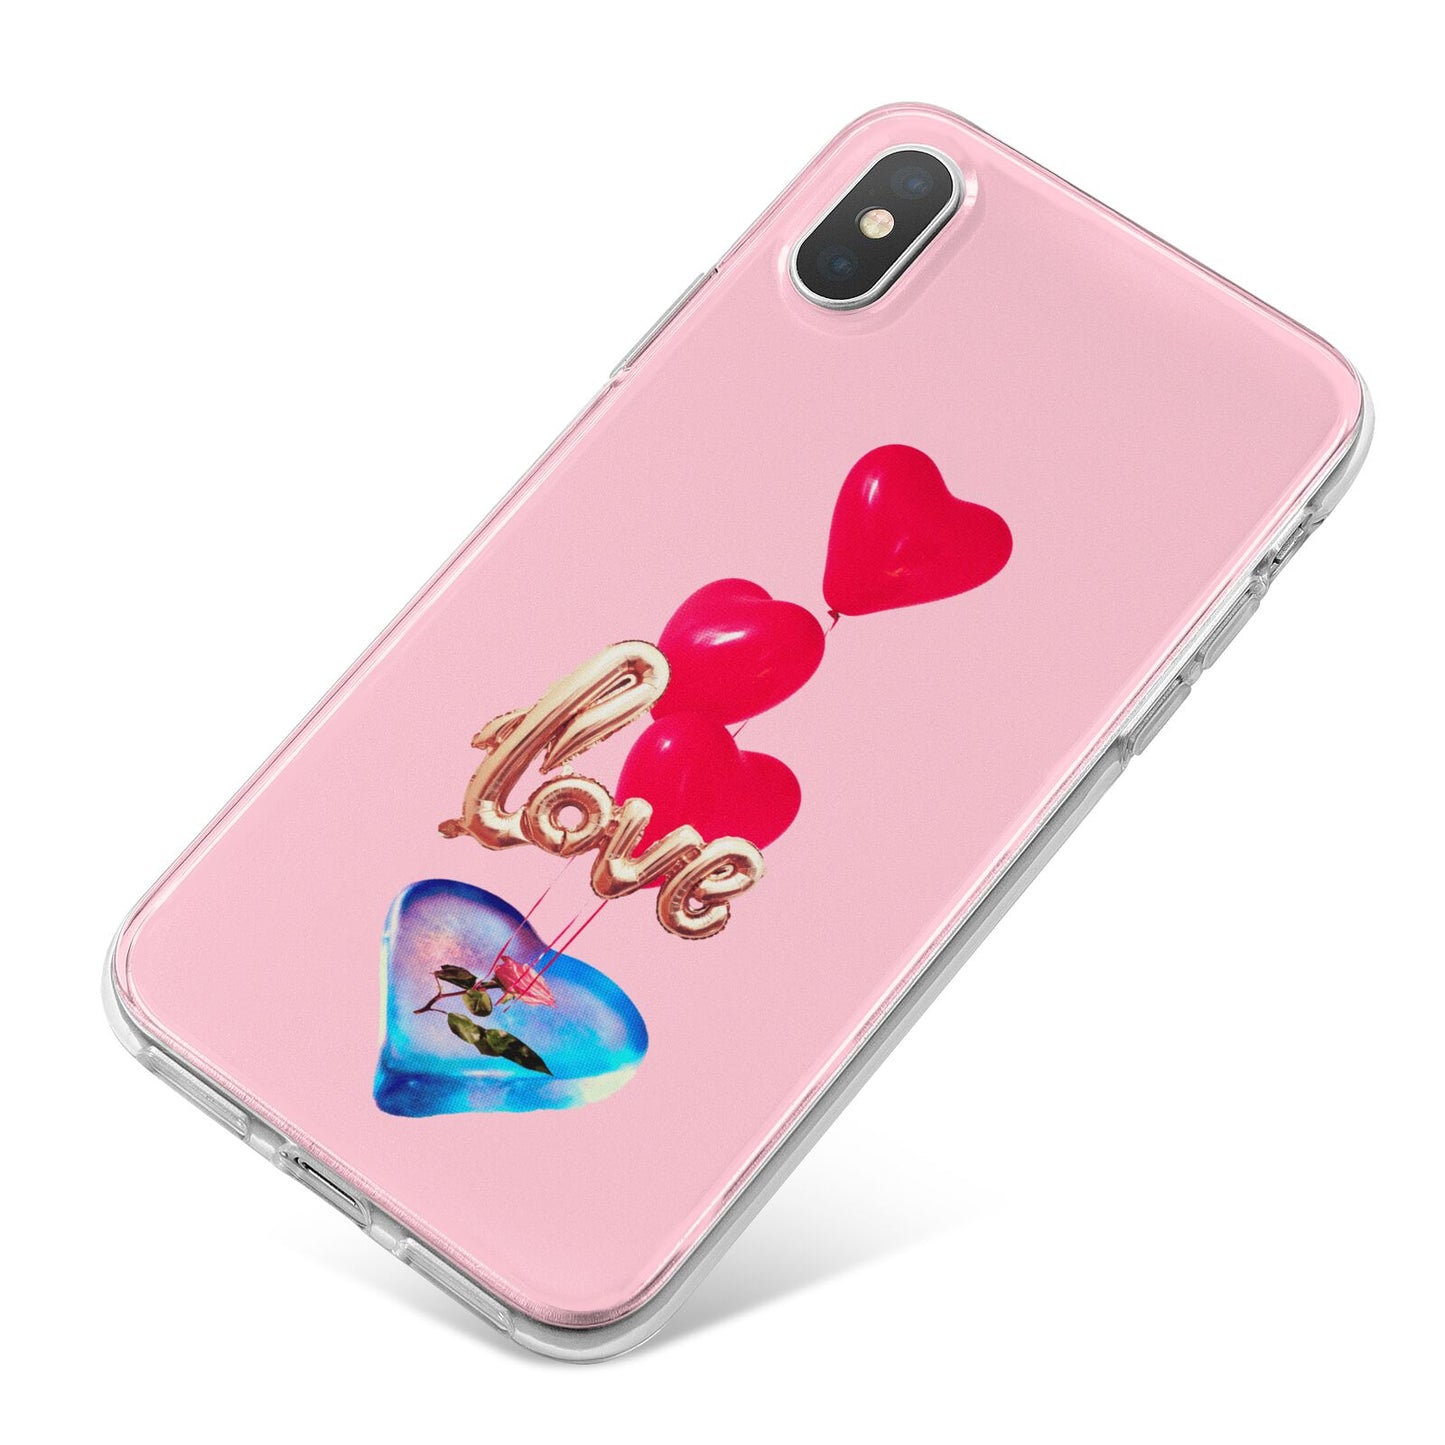 Love bubble balloon iPhone X Bumper Case on Silver iPhone